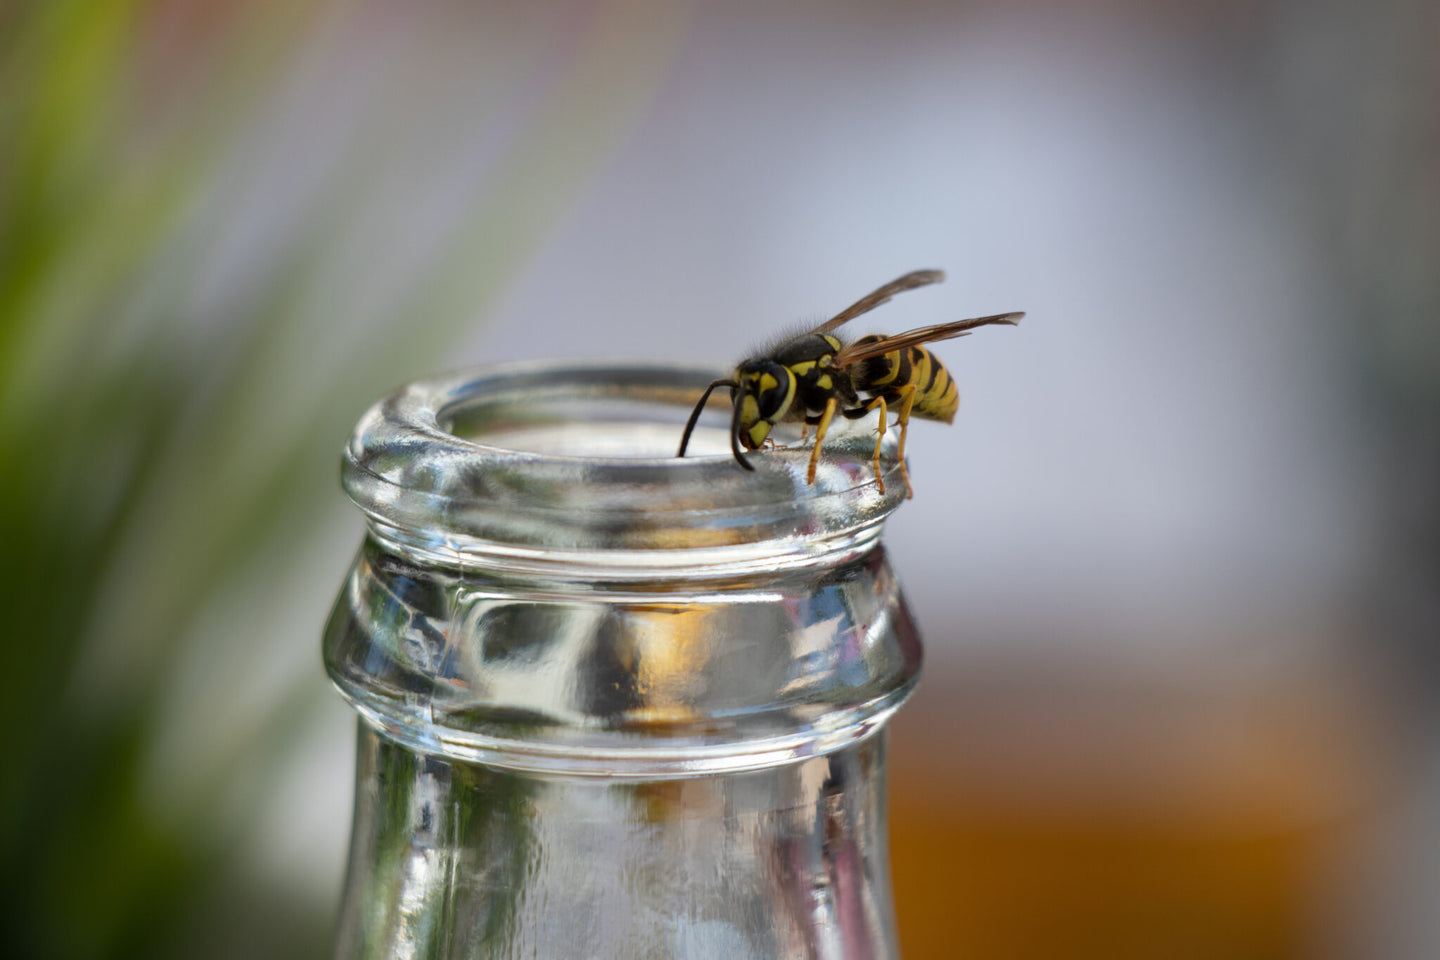 Animal-friendly tips against wasp nuisance 